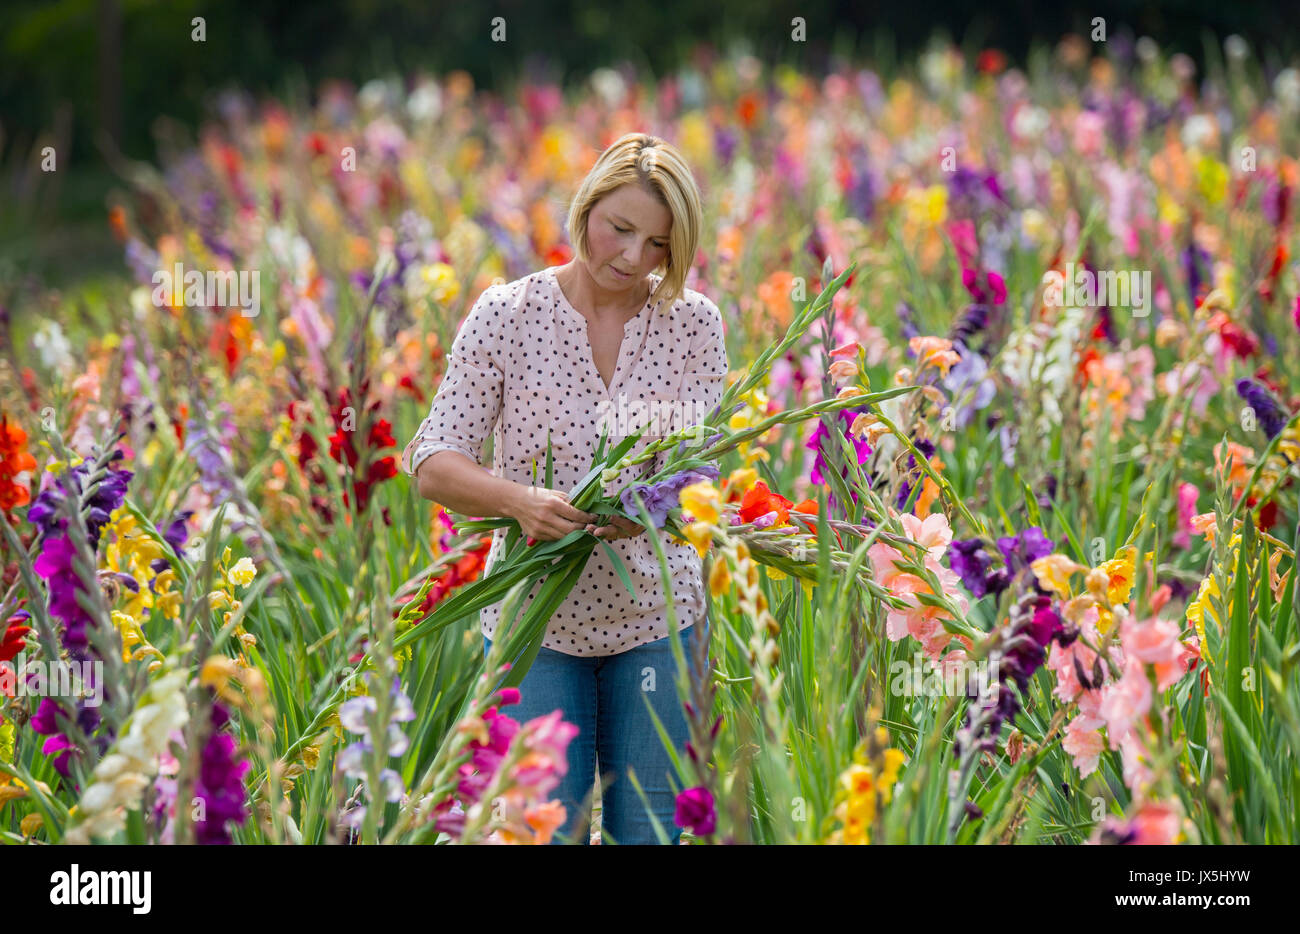 Kriftel, Germany. 15th Aug, 2017. Anna Bankiel standing with a freshly cut bundle of gladiolas in her flower field in Kriftel, Germany, 15 August 2017. Bankiel and her partner run a flower and pumpkin farm in Liederbach in the Taunus range. The flowers are not sprayed with chemicals. Gladiolas cost 0.70 euros, pollen-free sunflowers cost 1 euro and payment is done directly on the field. They have no problems with theft, as the two entrepreneurs maintain close contact through social media with their clientele, mostly repeat customers. Photo: Andreas Arnold/dpa/Alamy Live News Stock Photo